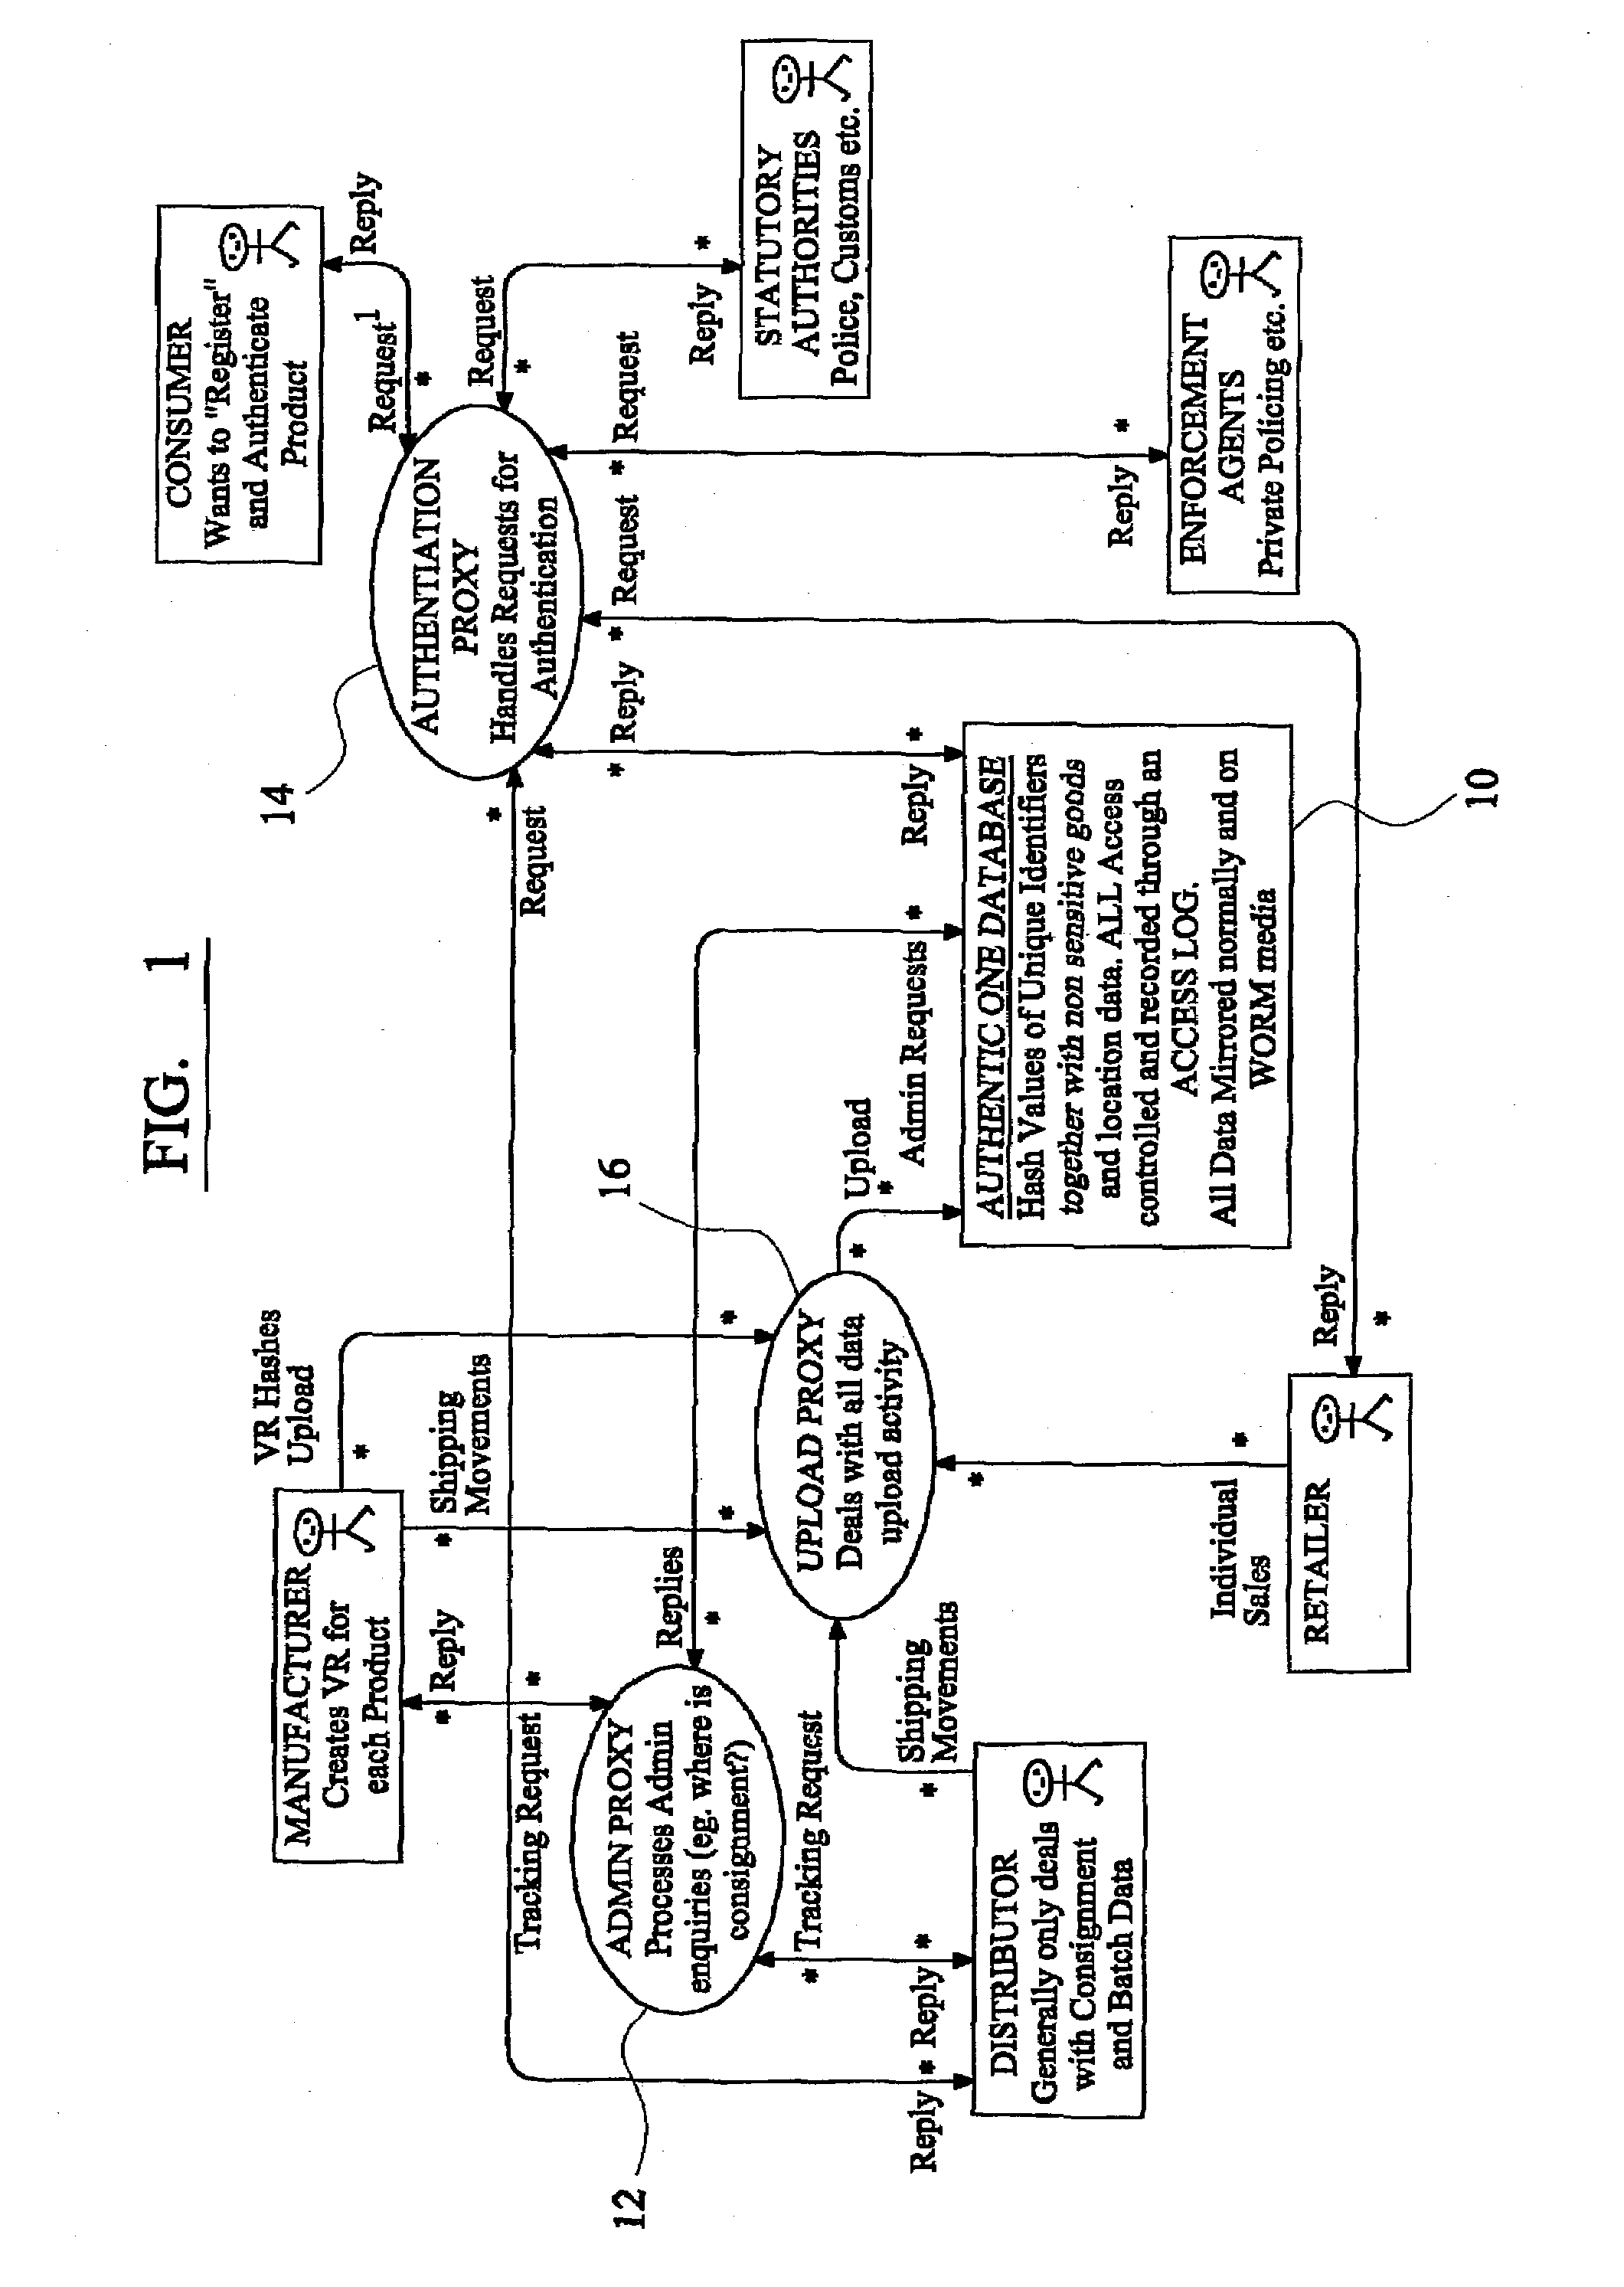 Remote authentication system